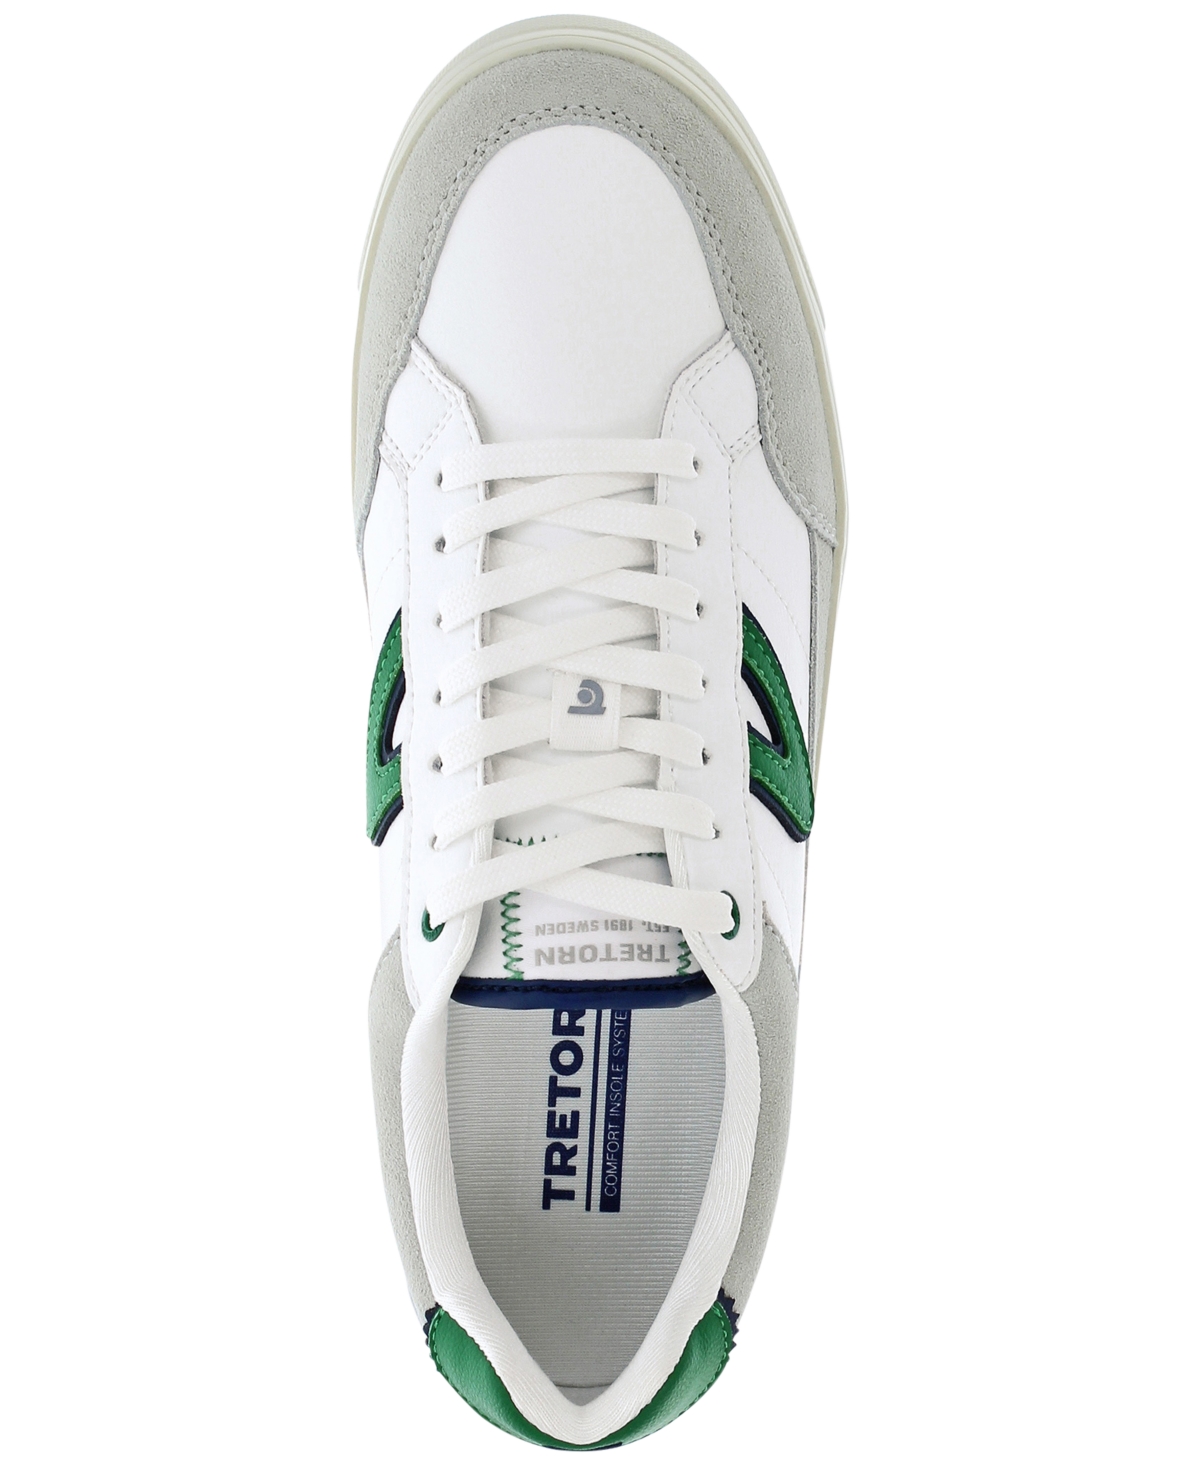 Shop Tretorn Women's Harlow Elite Casual Sneakers From Finish Line In White,green